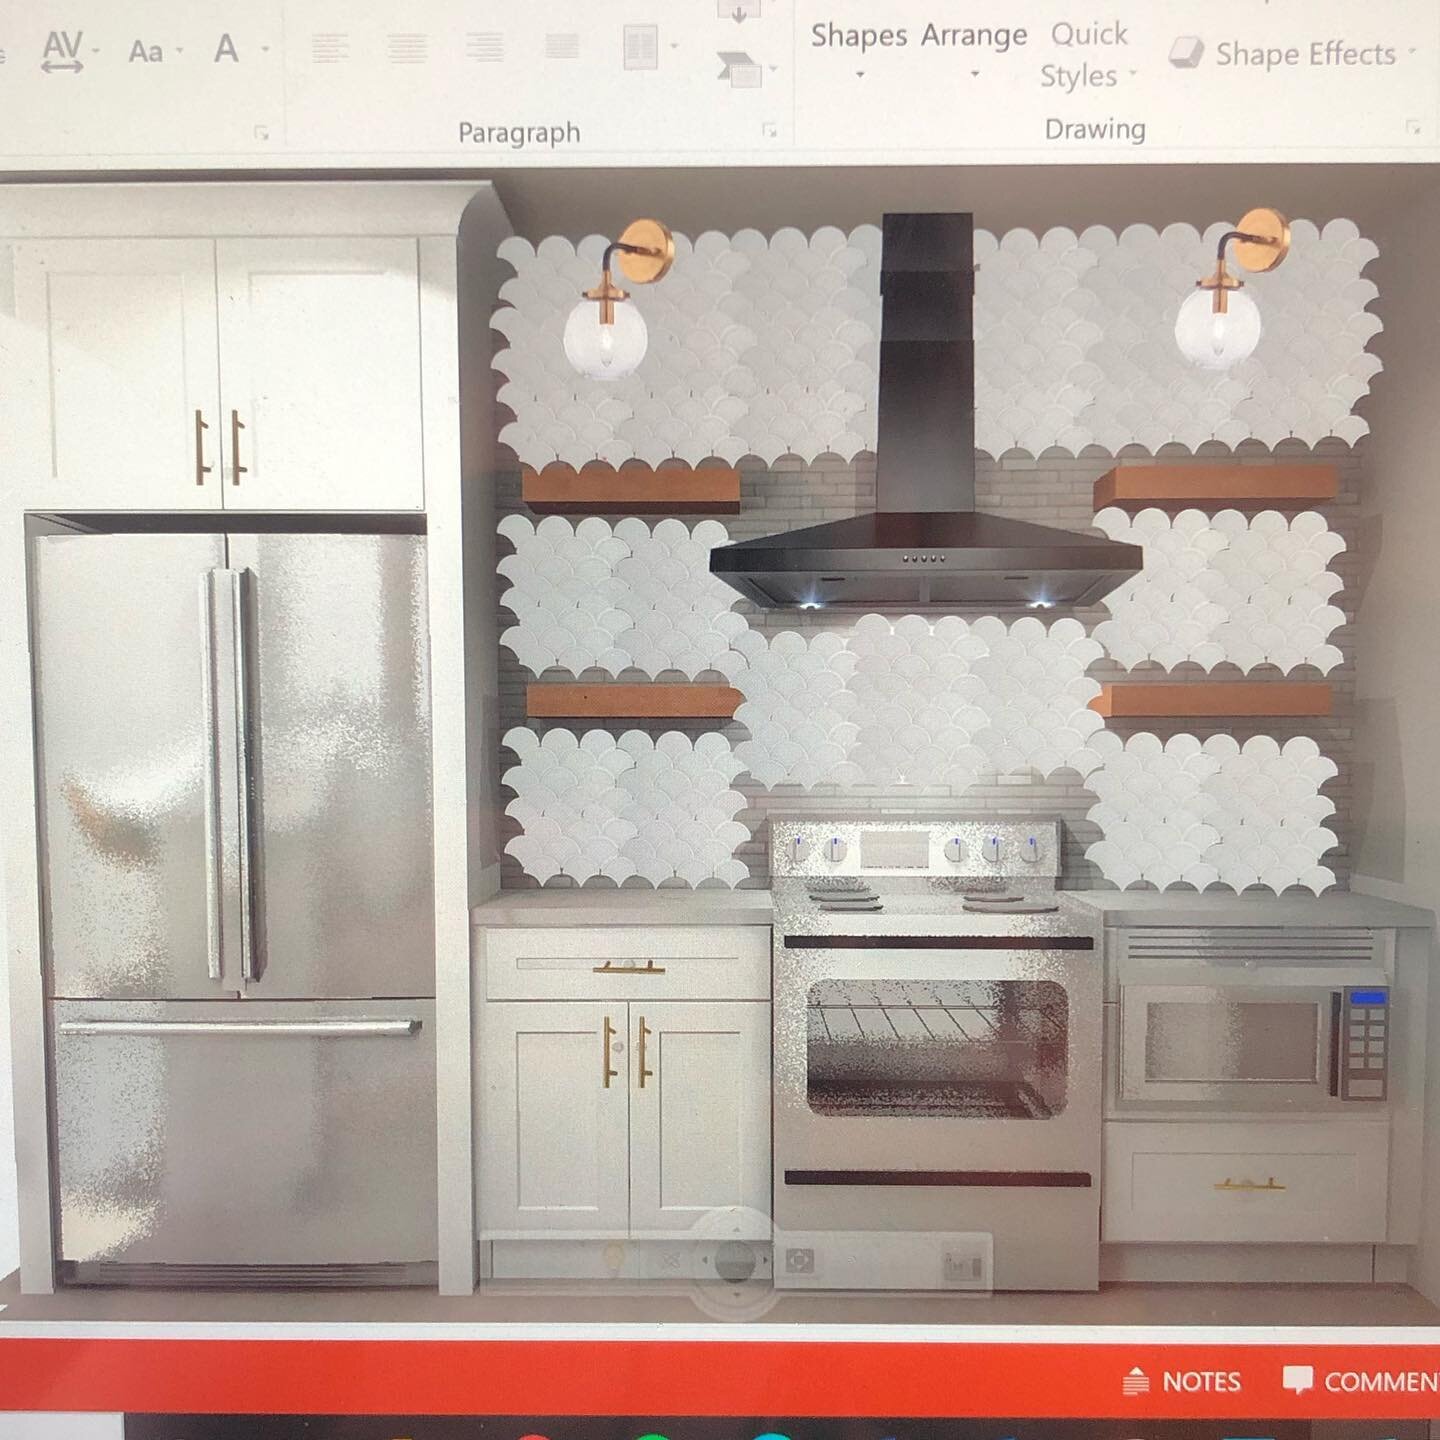 While Darryl is over at the Waldron project working on &ldquo;the guts&rdquo; of the house, you know, all the boring things that are important buttttt also get covered up, I am putting the finishing touches on the kitchen design.

The theme of the da